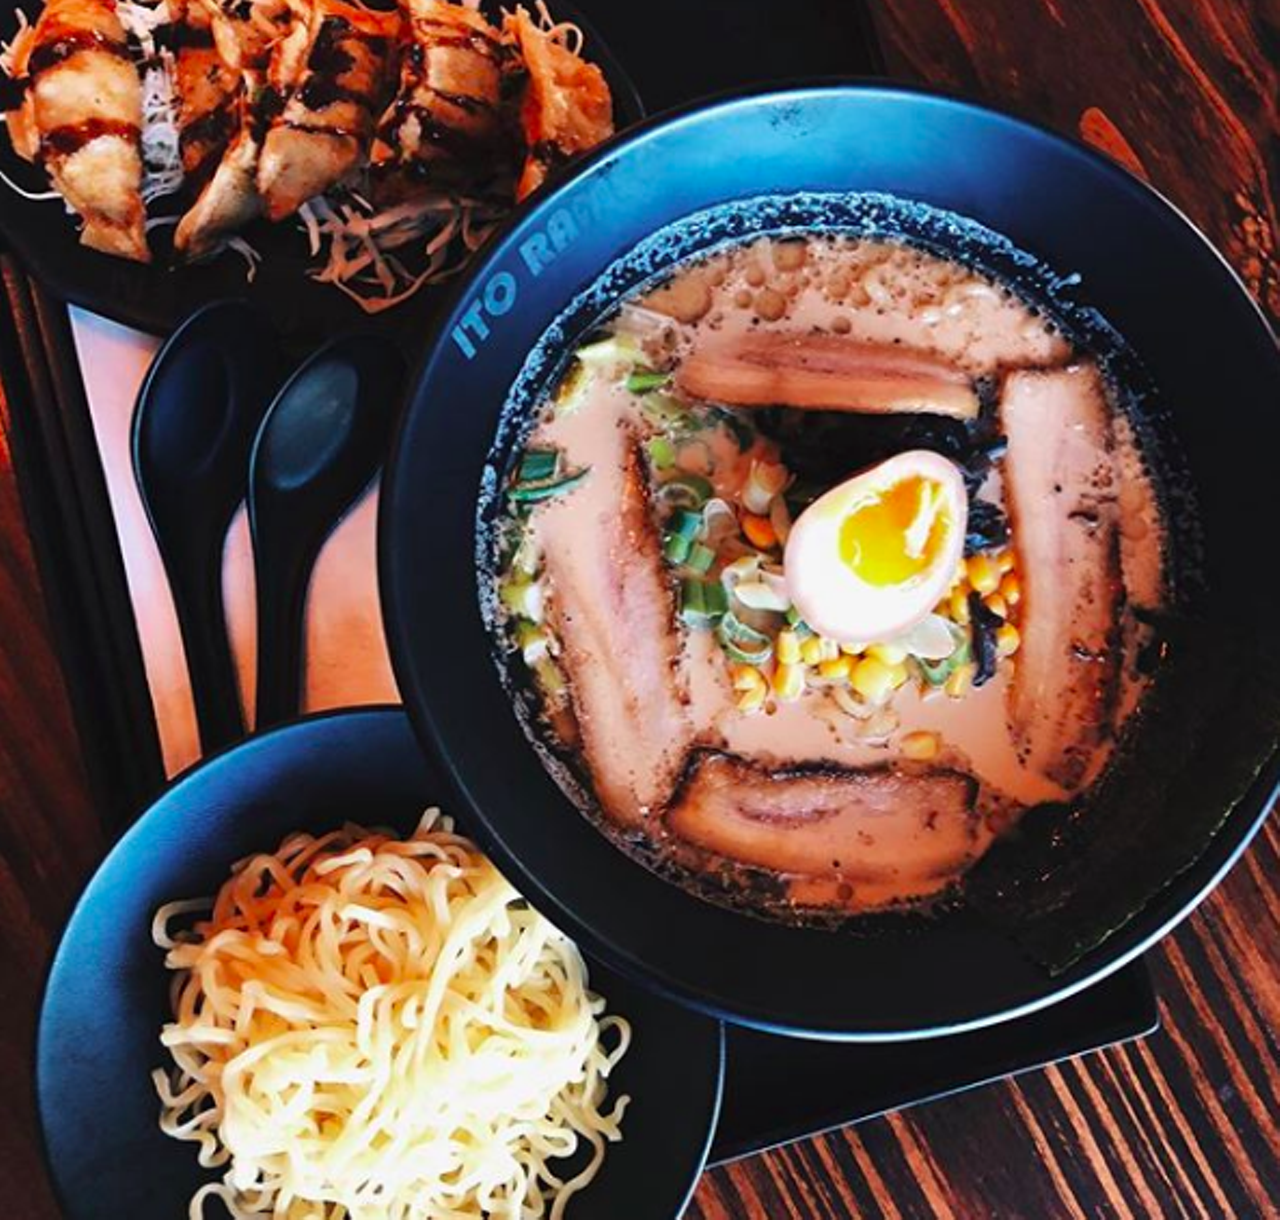 Ito Ramen
14395 Blanco Road, (210) 843-4230, itoramen.us
Priding itself in serving up authentic AF bowls, Ito Ramen gives you plenty of options: regular or spicy, pork or seafood, veggie or not. However you customize your bowl, it will definitely be tasty and completely satisfying.
Photo via Instagram / leiaquintos